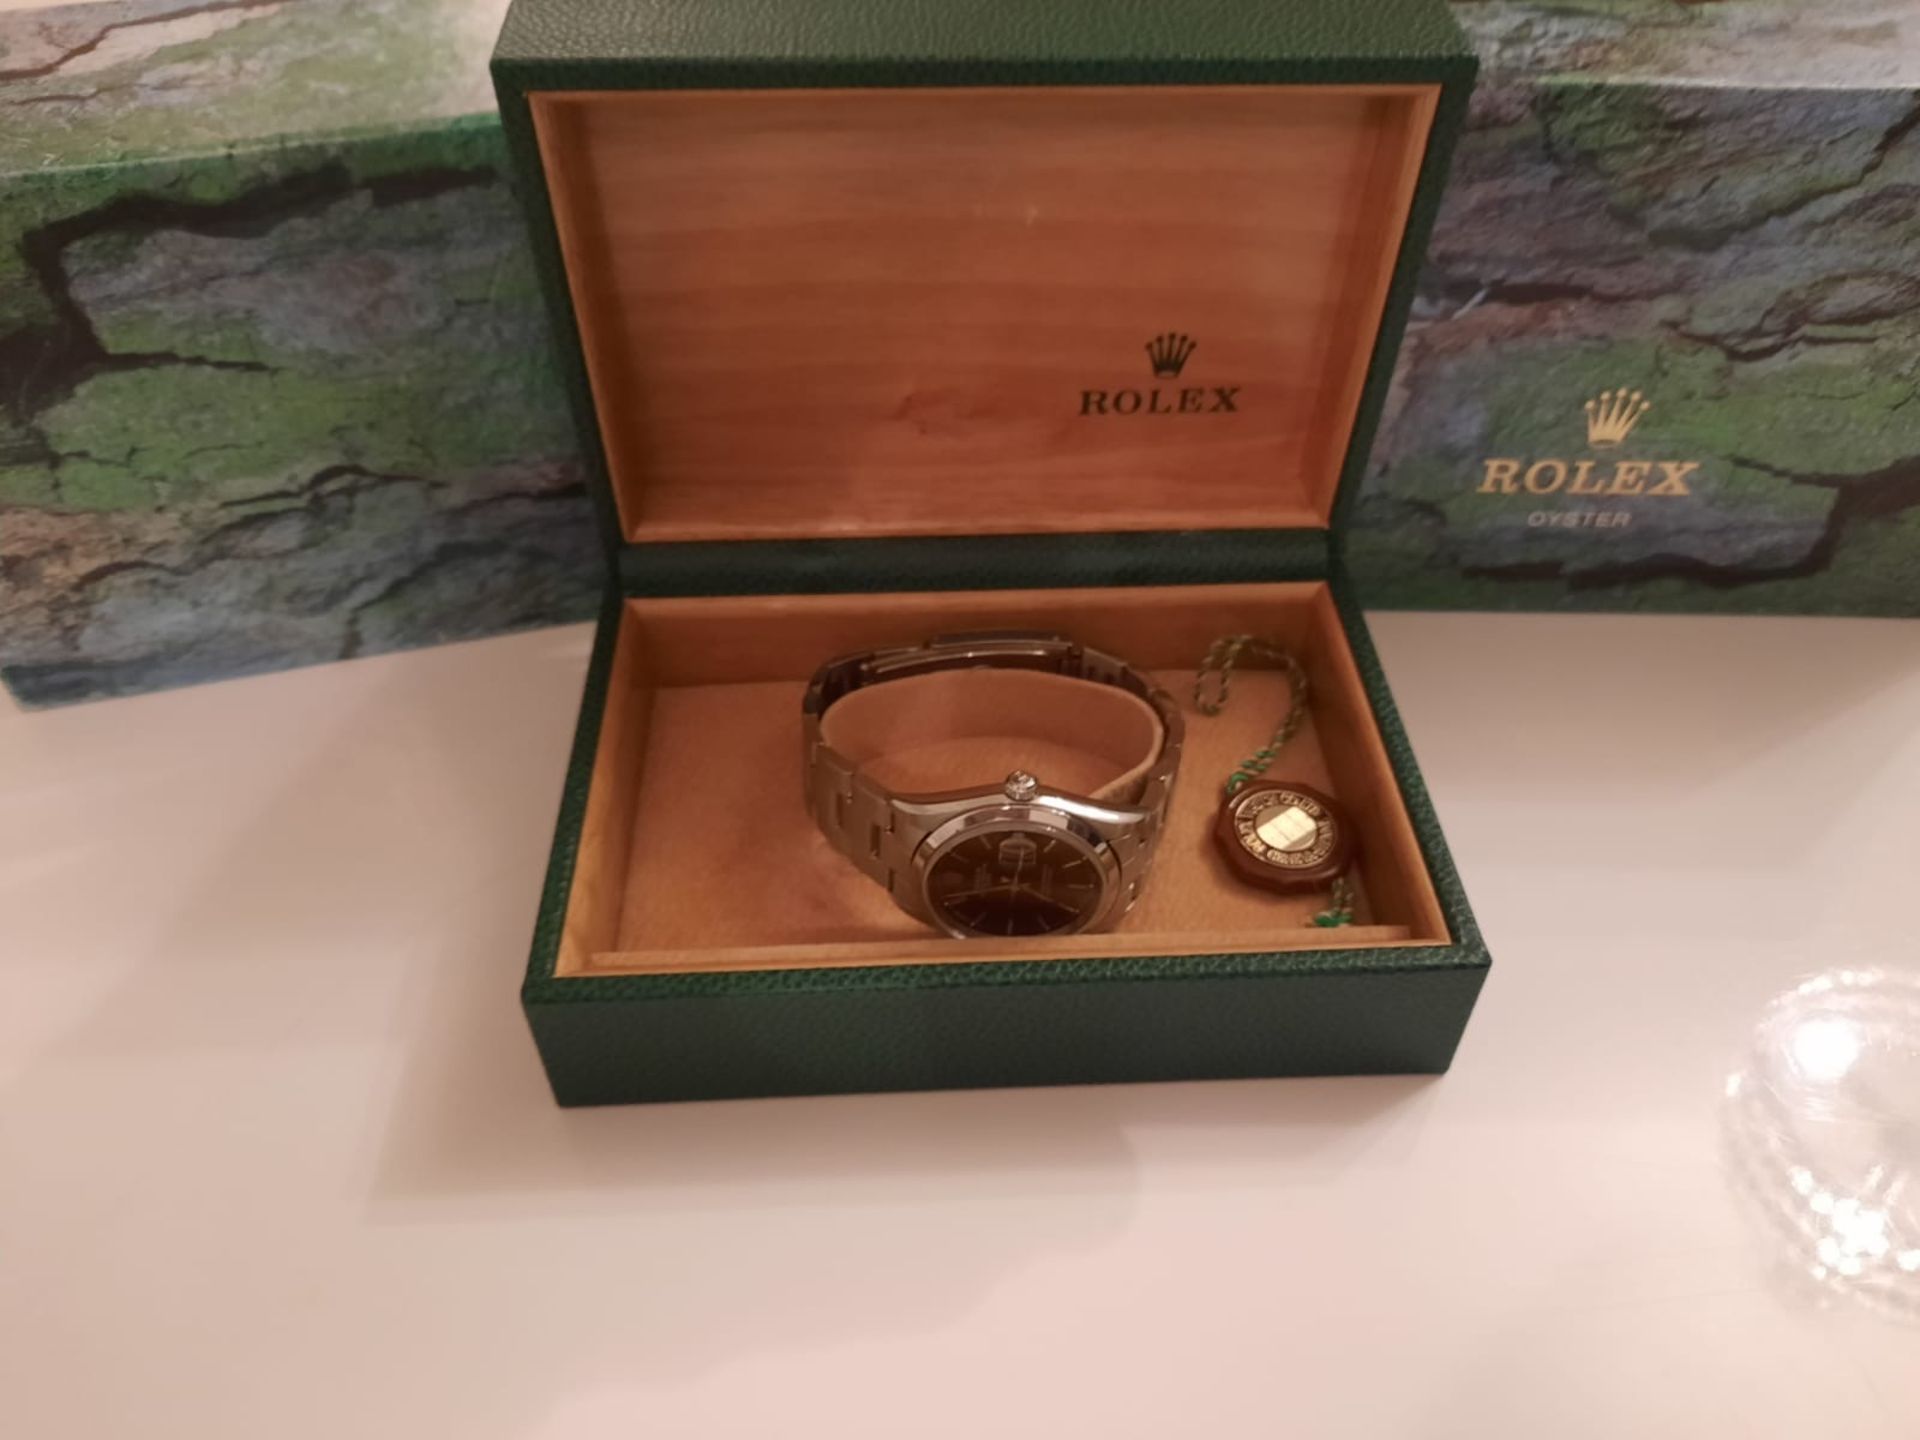 GENTS ROLEX OYSTER PERPETUAL DATE STAINLESS STEEL WRIST WATCH WITH BOX AND PAPERS